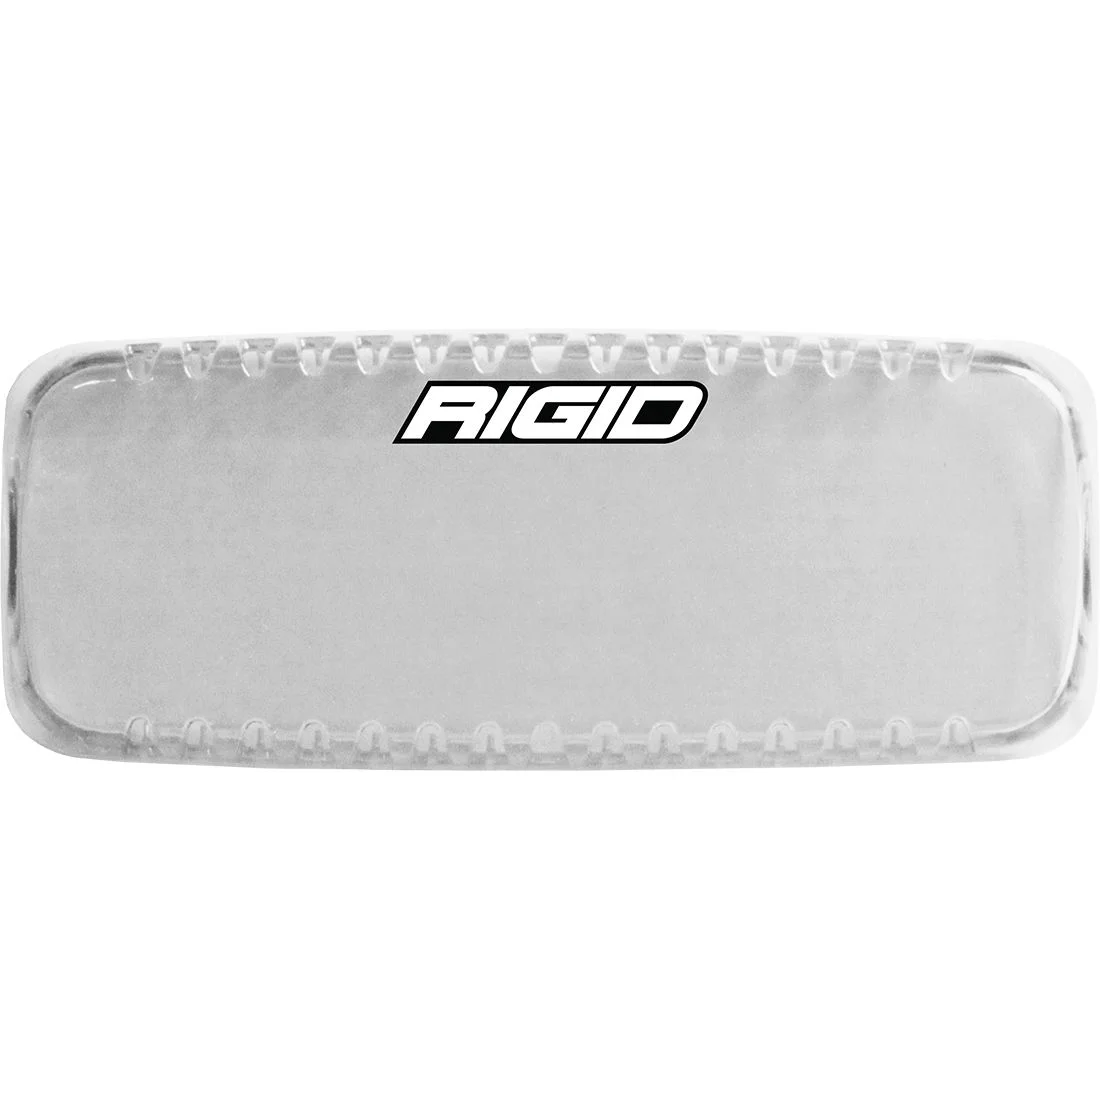 Rigid SR-Q Series Light Covers (Sold in INDIVIDUALLY)